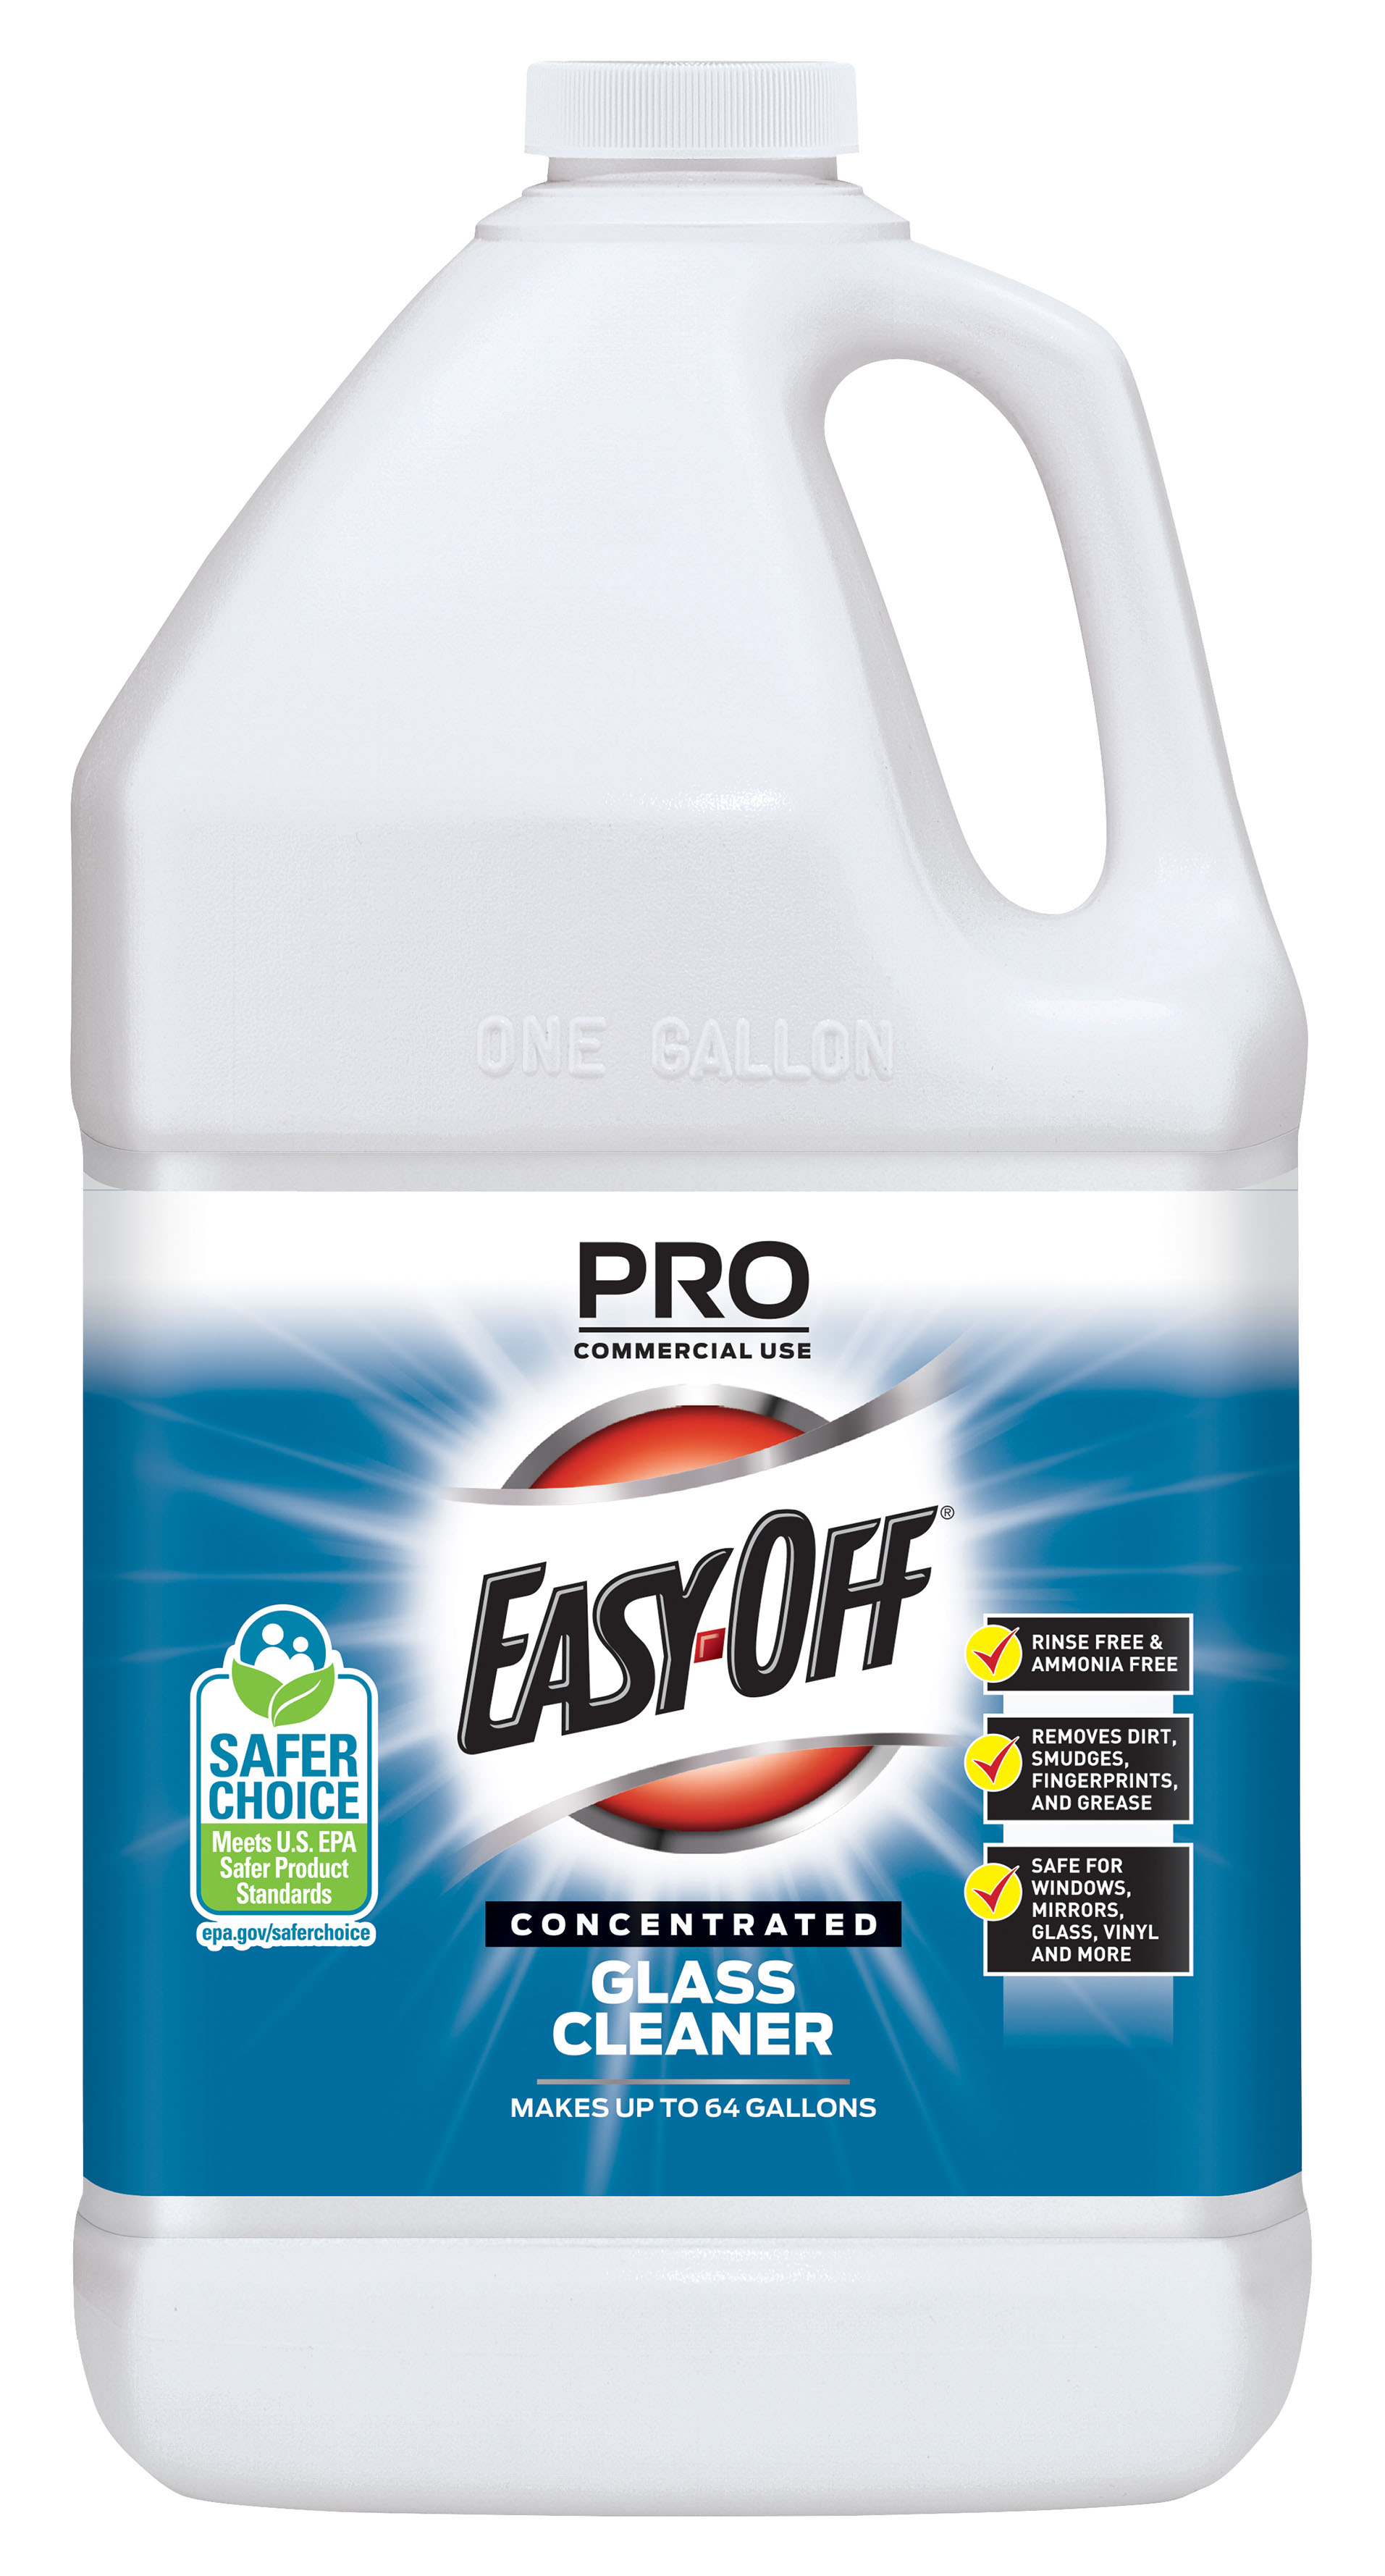 Professional EASYOFF Concentrated Glass Cleaner